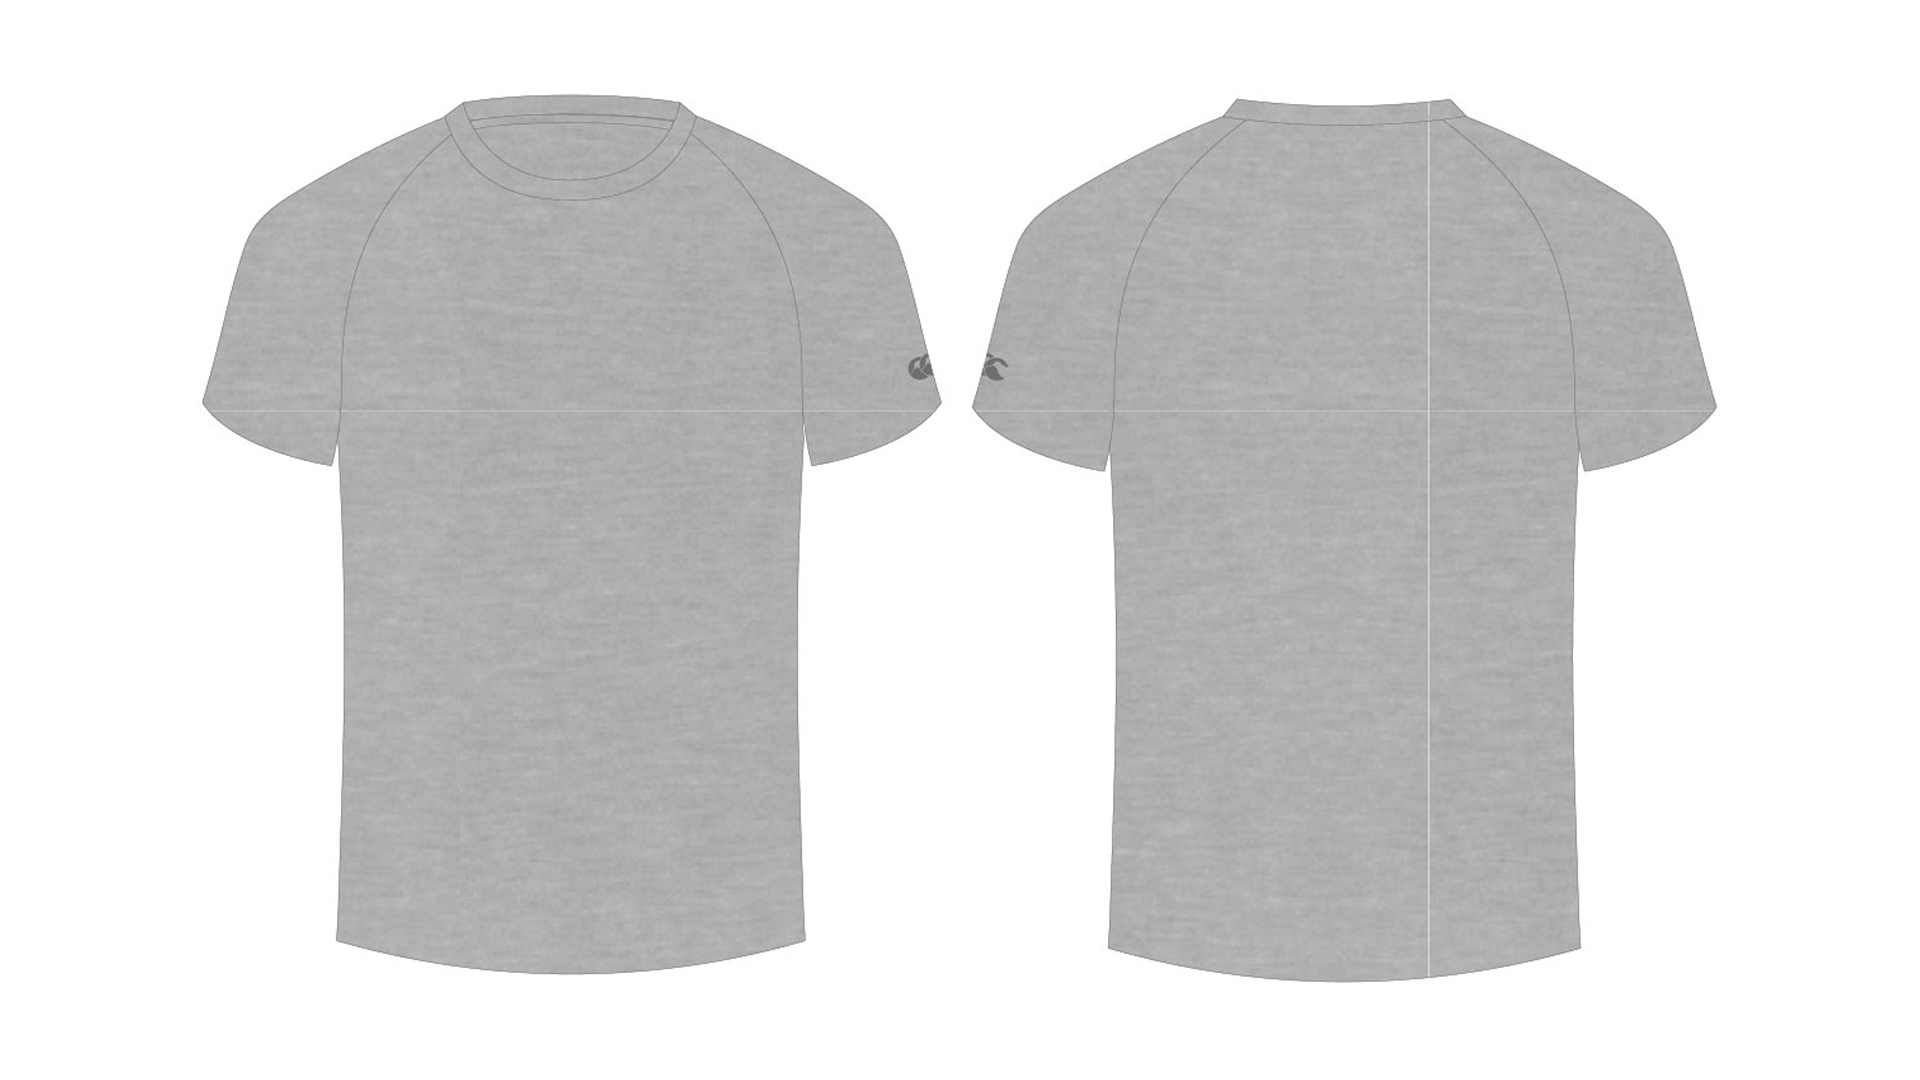 Blank Tshirt Template for Classroom in Gray Color HD Wallpapers